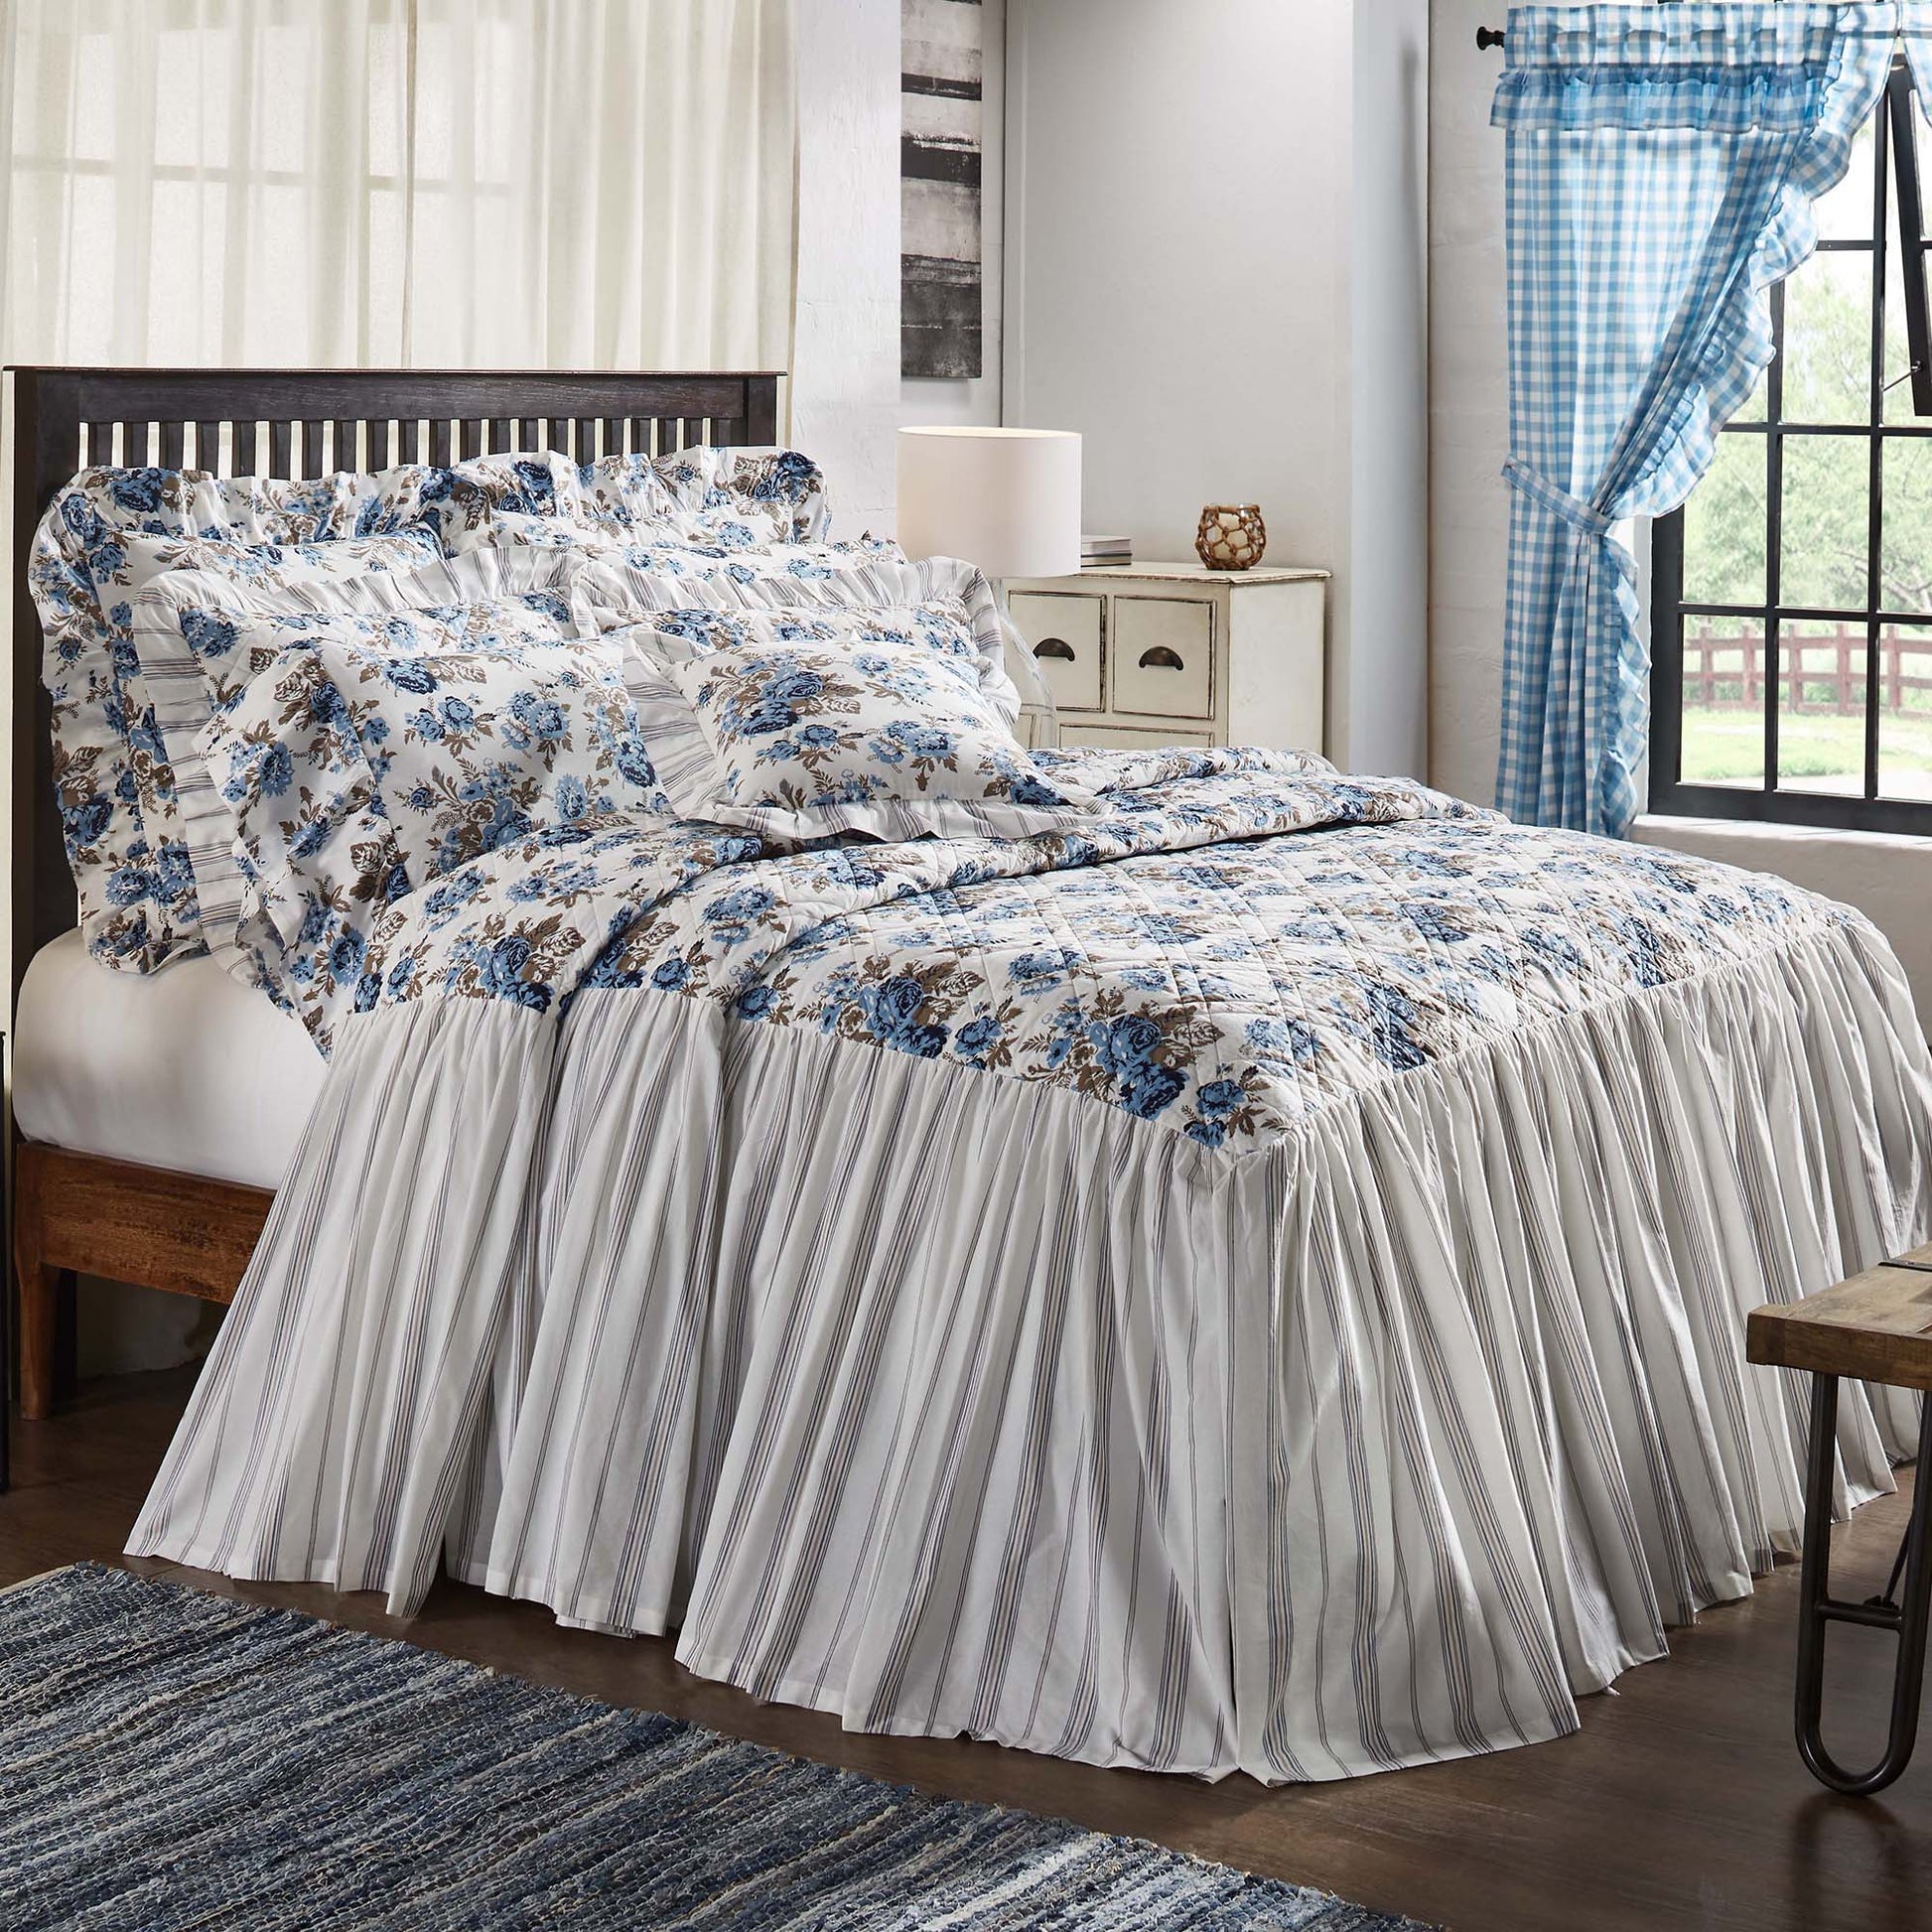 69995-Annie-Blue-Floral-Ruffled-Queen-Coverlet-80x60-27-image-4